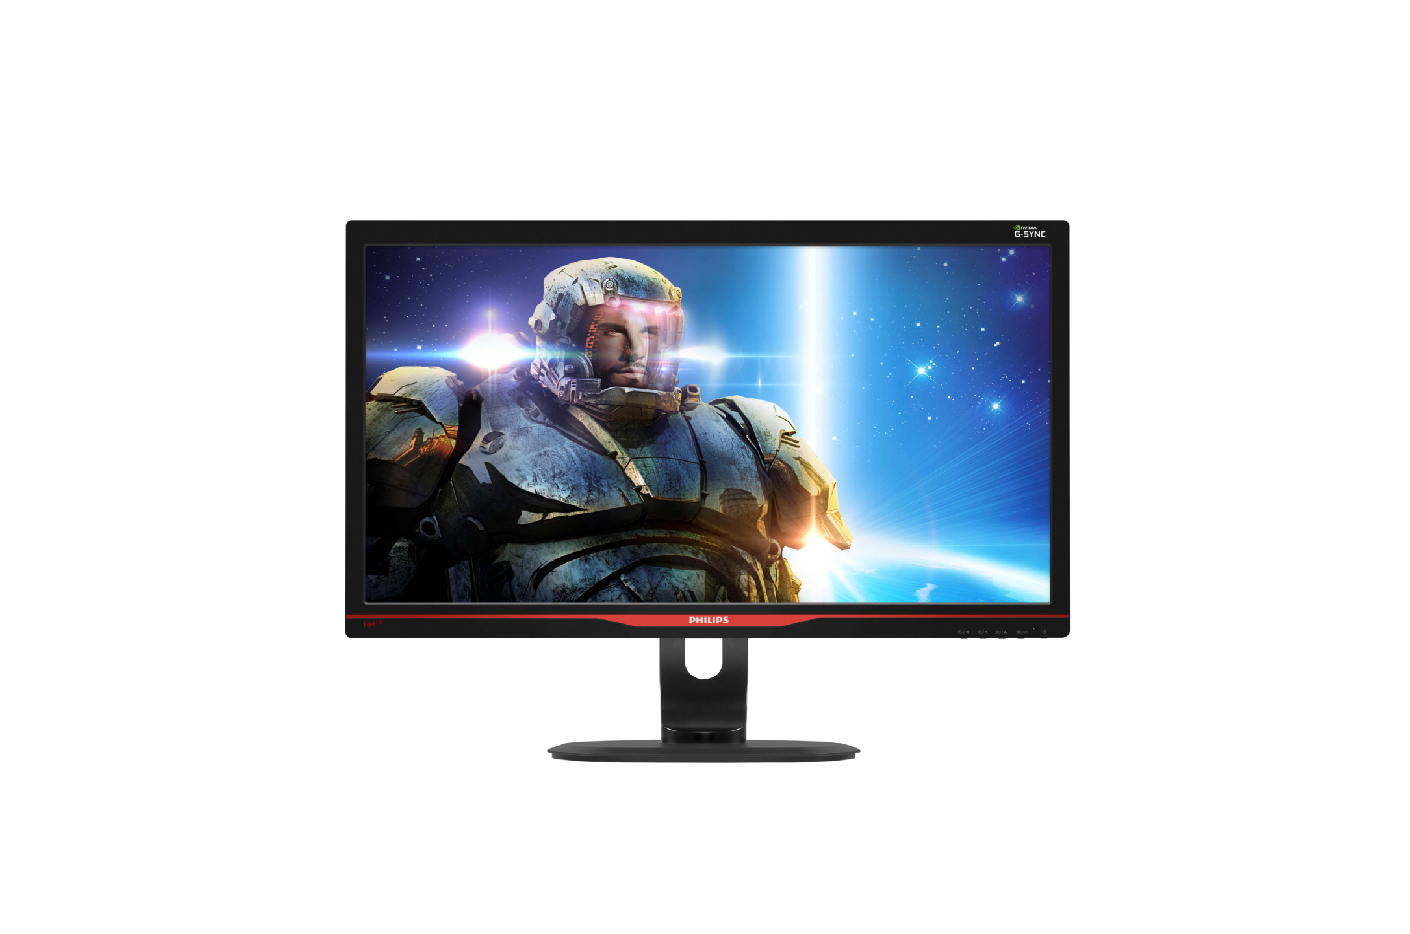 linux video cards for 4k monitors